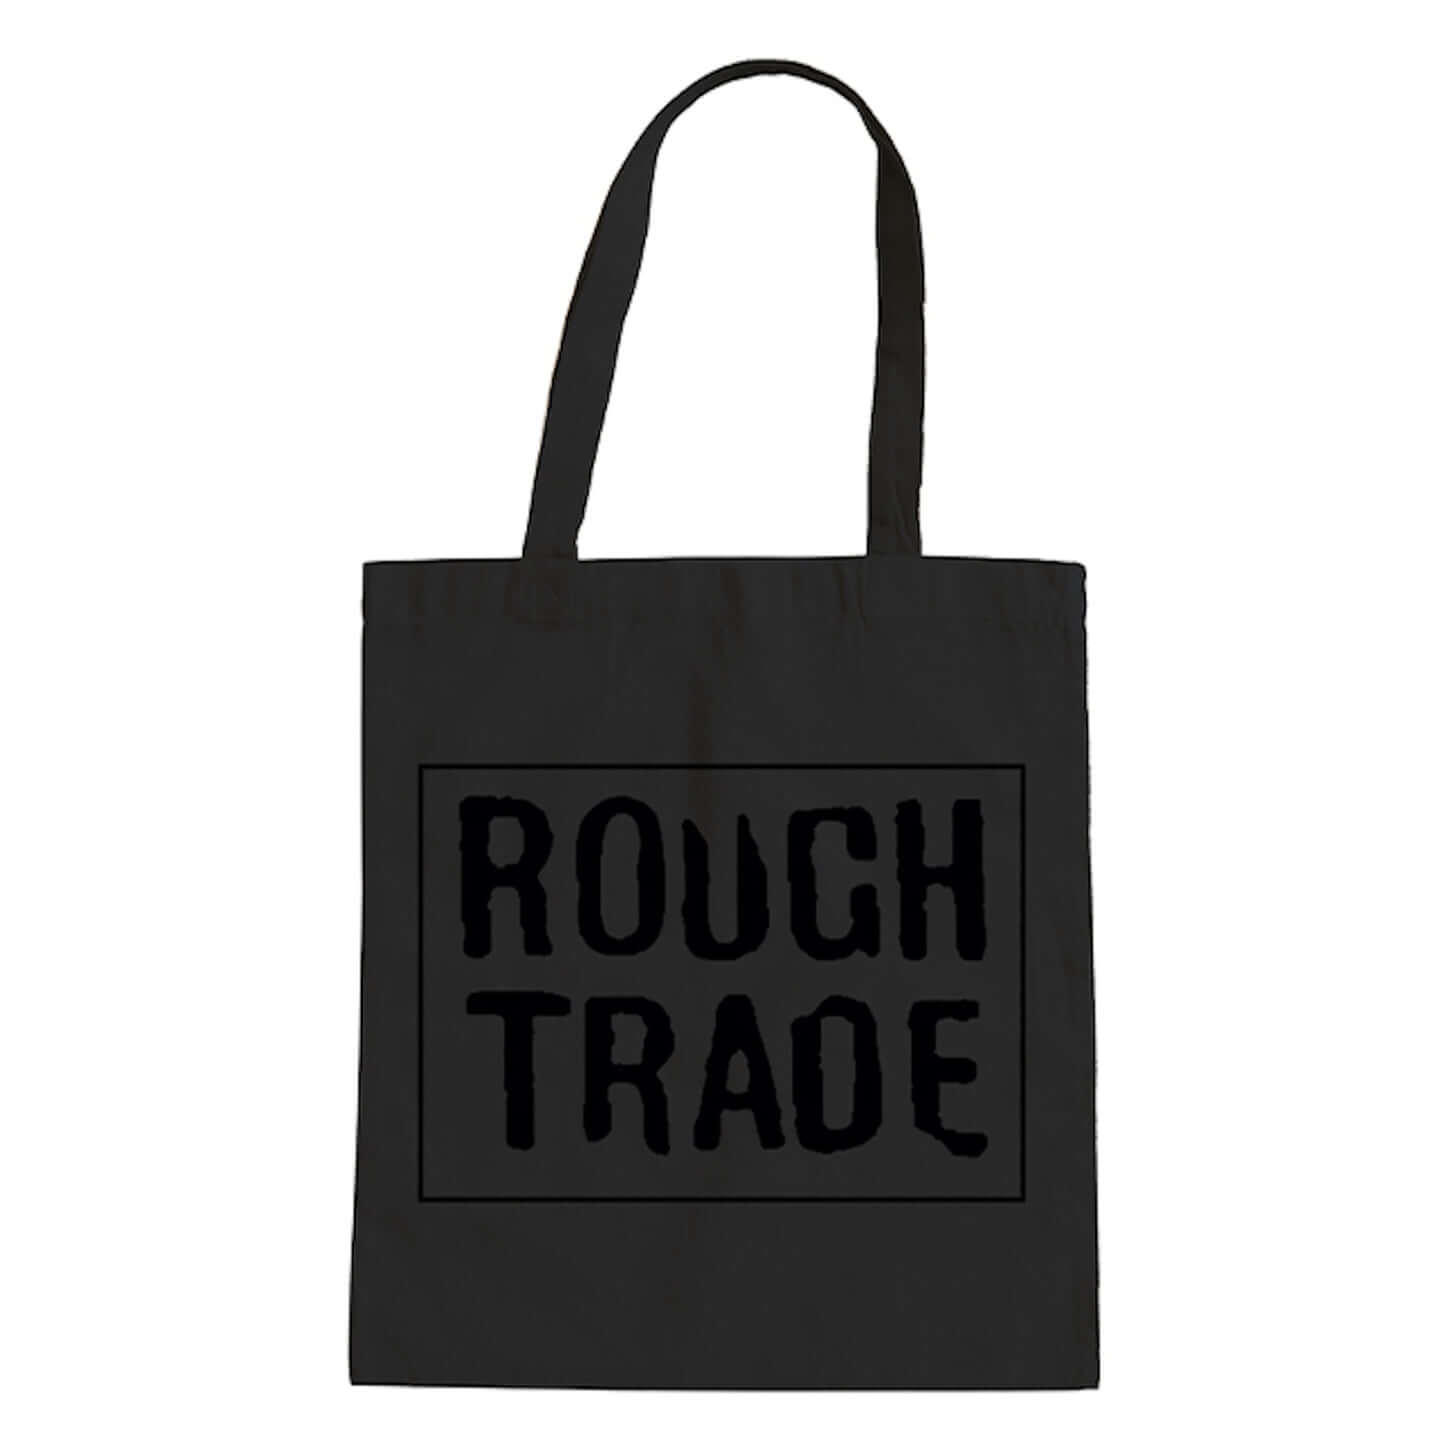 Rough Trade Recordsの特別展示が代官山蔦屋書店にて開催中！